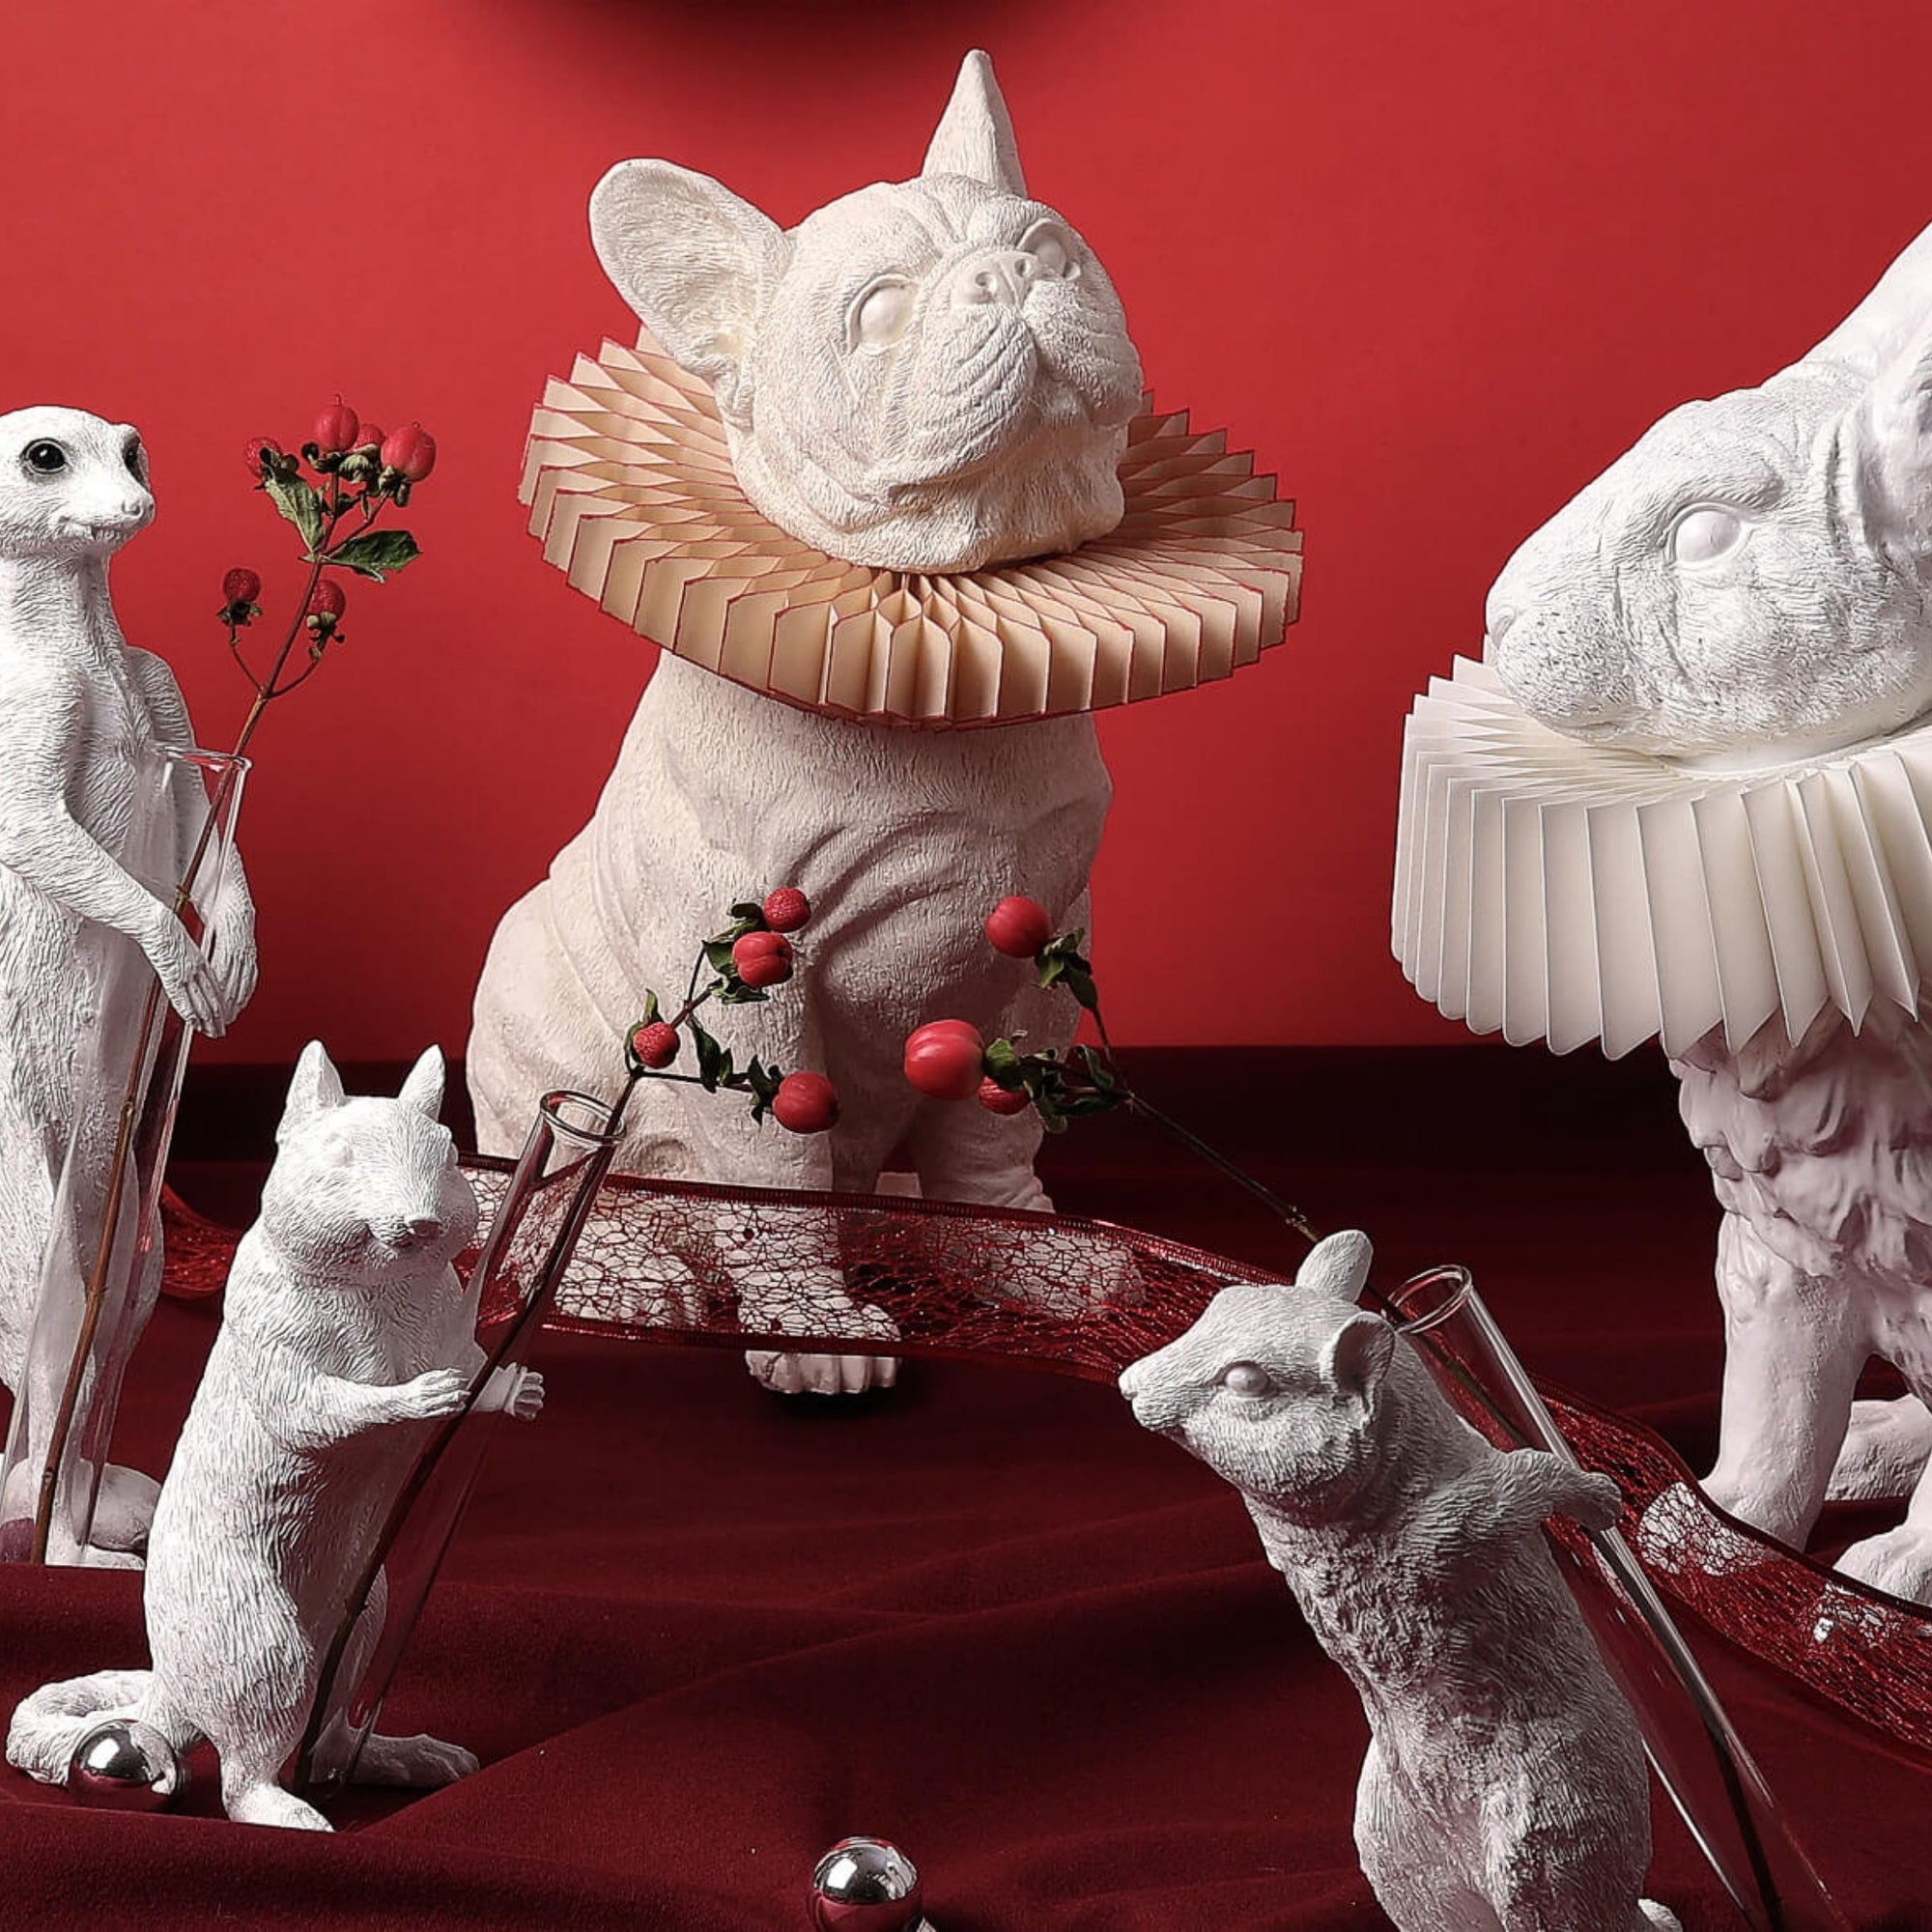 Squirrel Christmas brings you the best of decor and ornaments